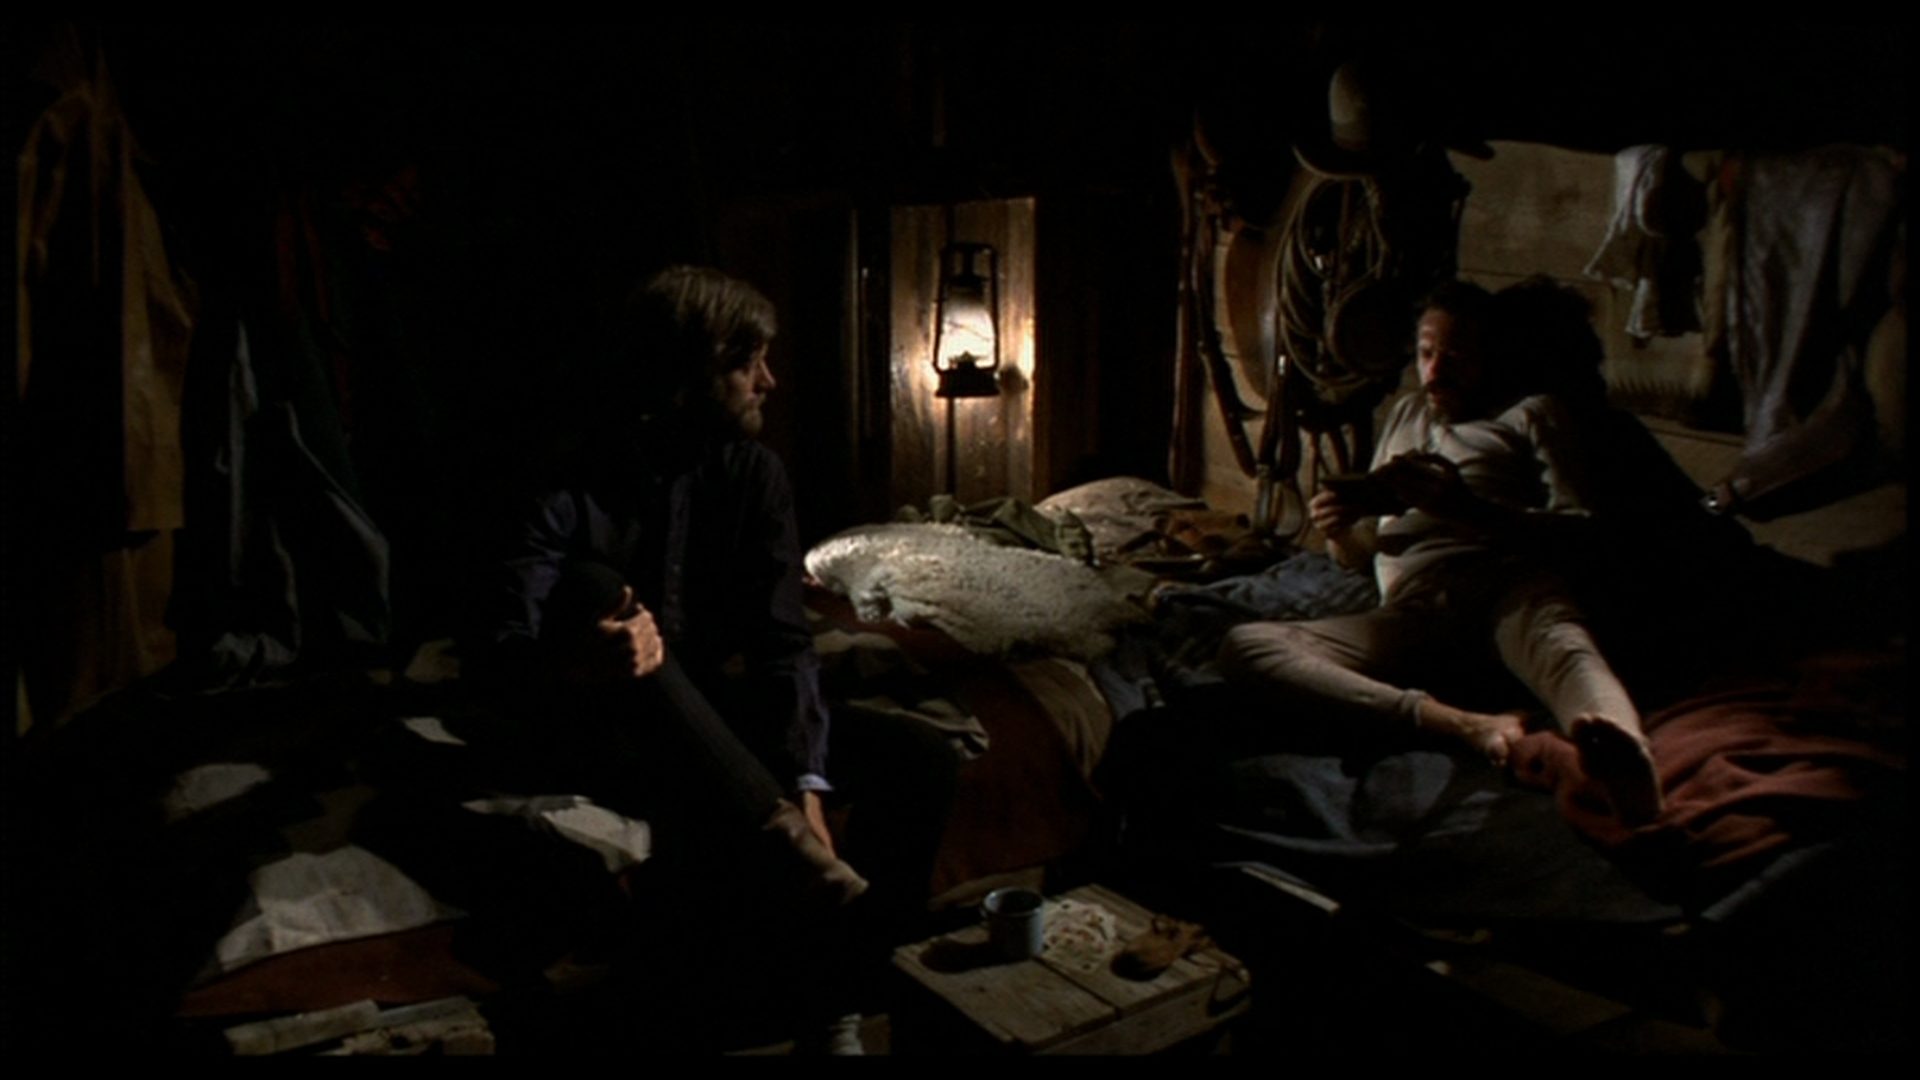 Harry Collings and Arch Harris go to bed in a sparsely lit cabin.